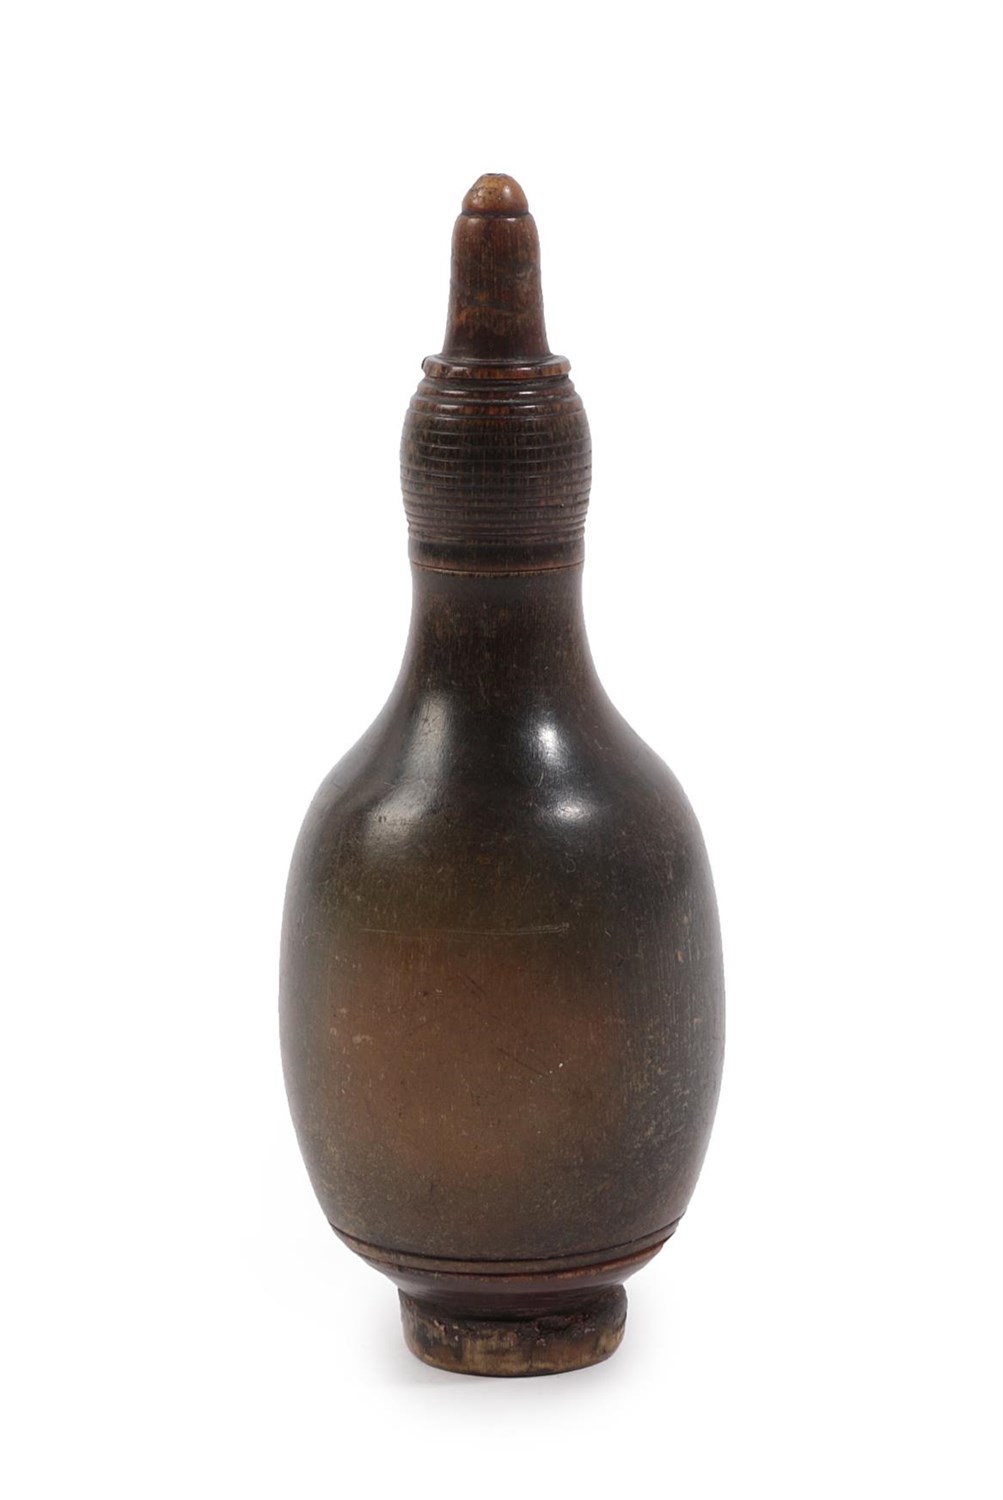 Lot 174 - A Chinese Rhinoceros Horn Snuff Bottle and Screw Top, Qing Dynasty, 19th century, of turned...